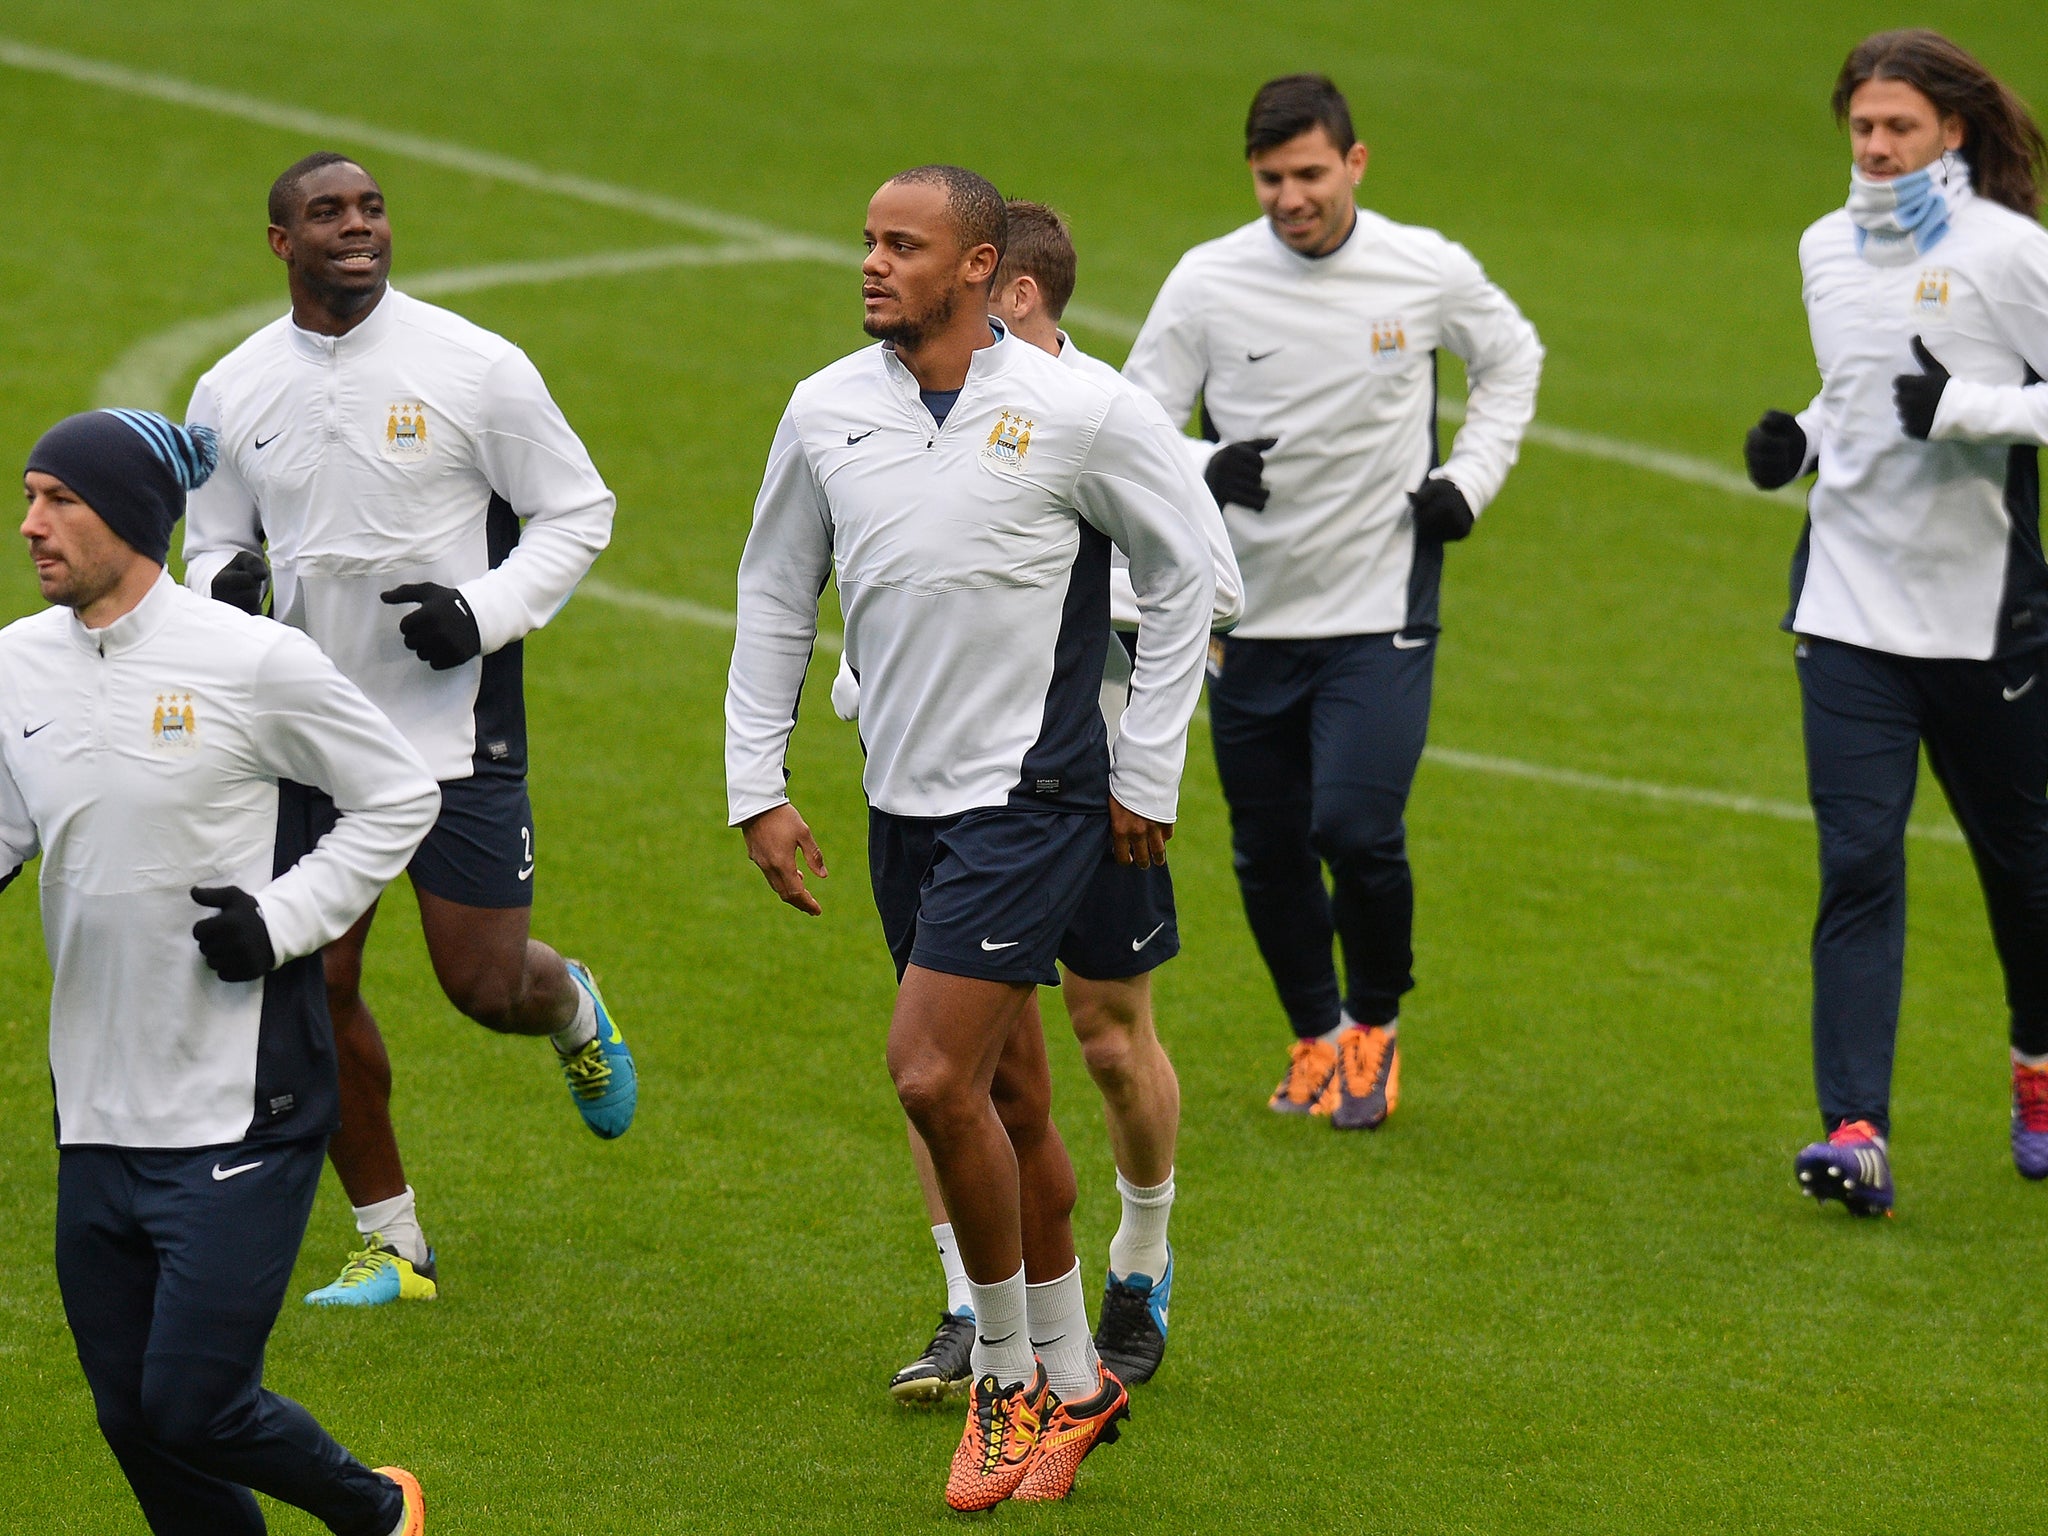 Manchester City captain Vincent Kompany has been back in training for over a week and should make his return to action against either West Brom or Southampton